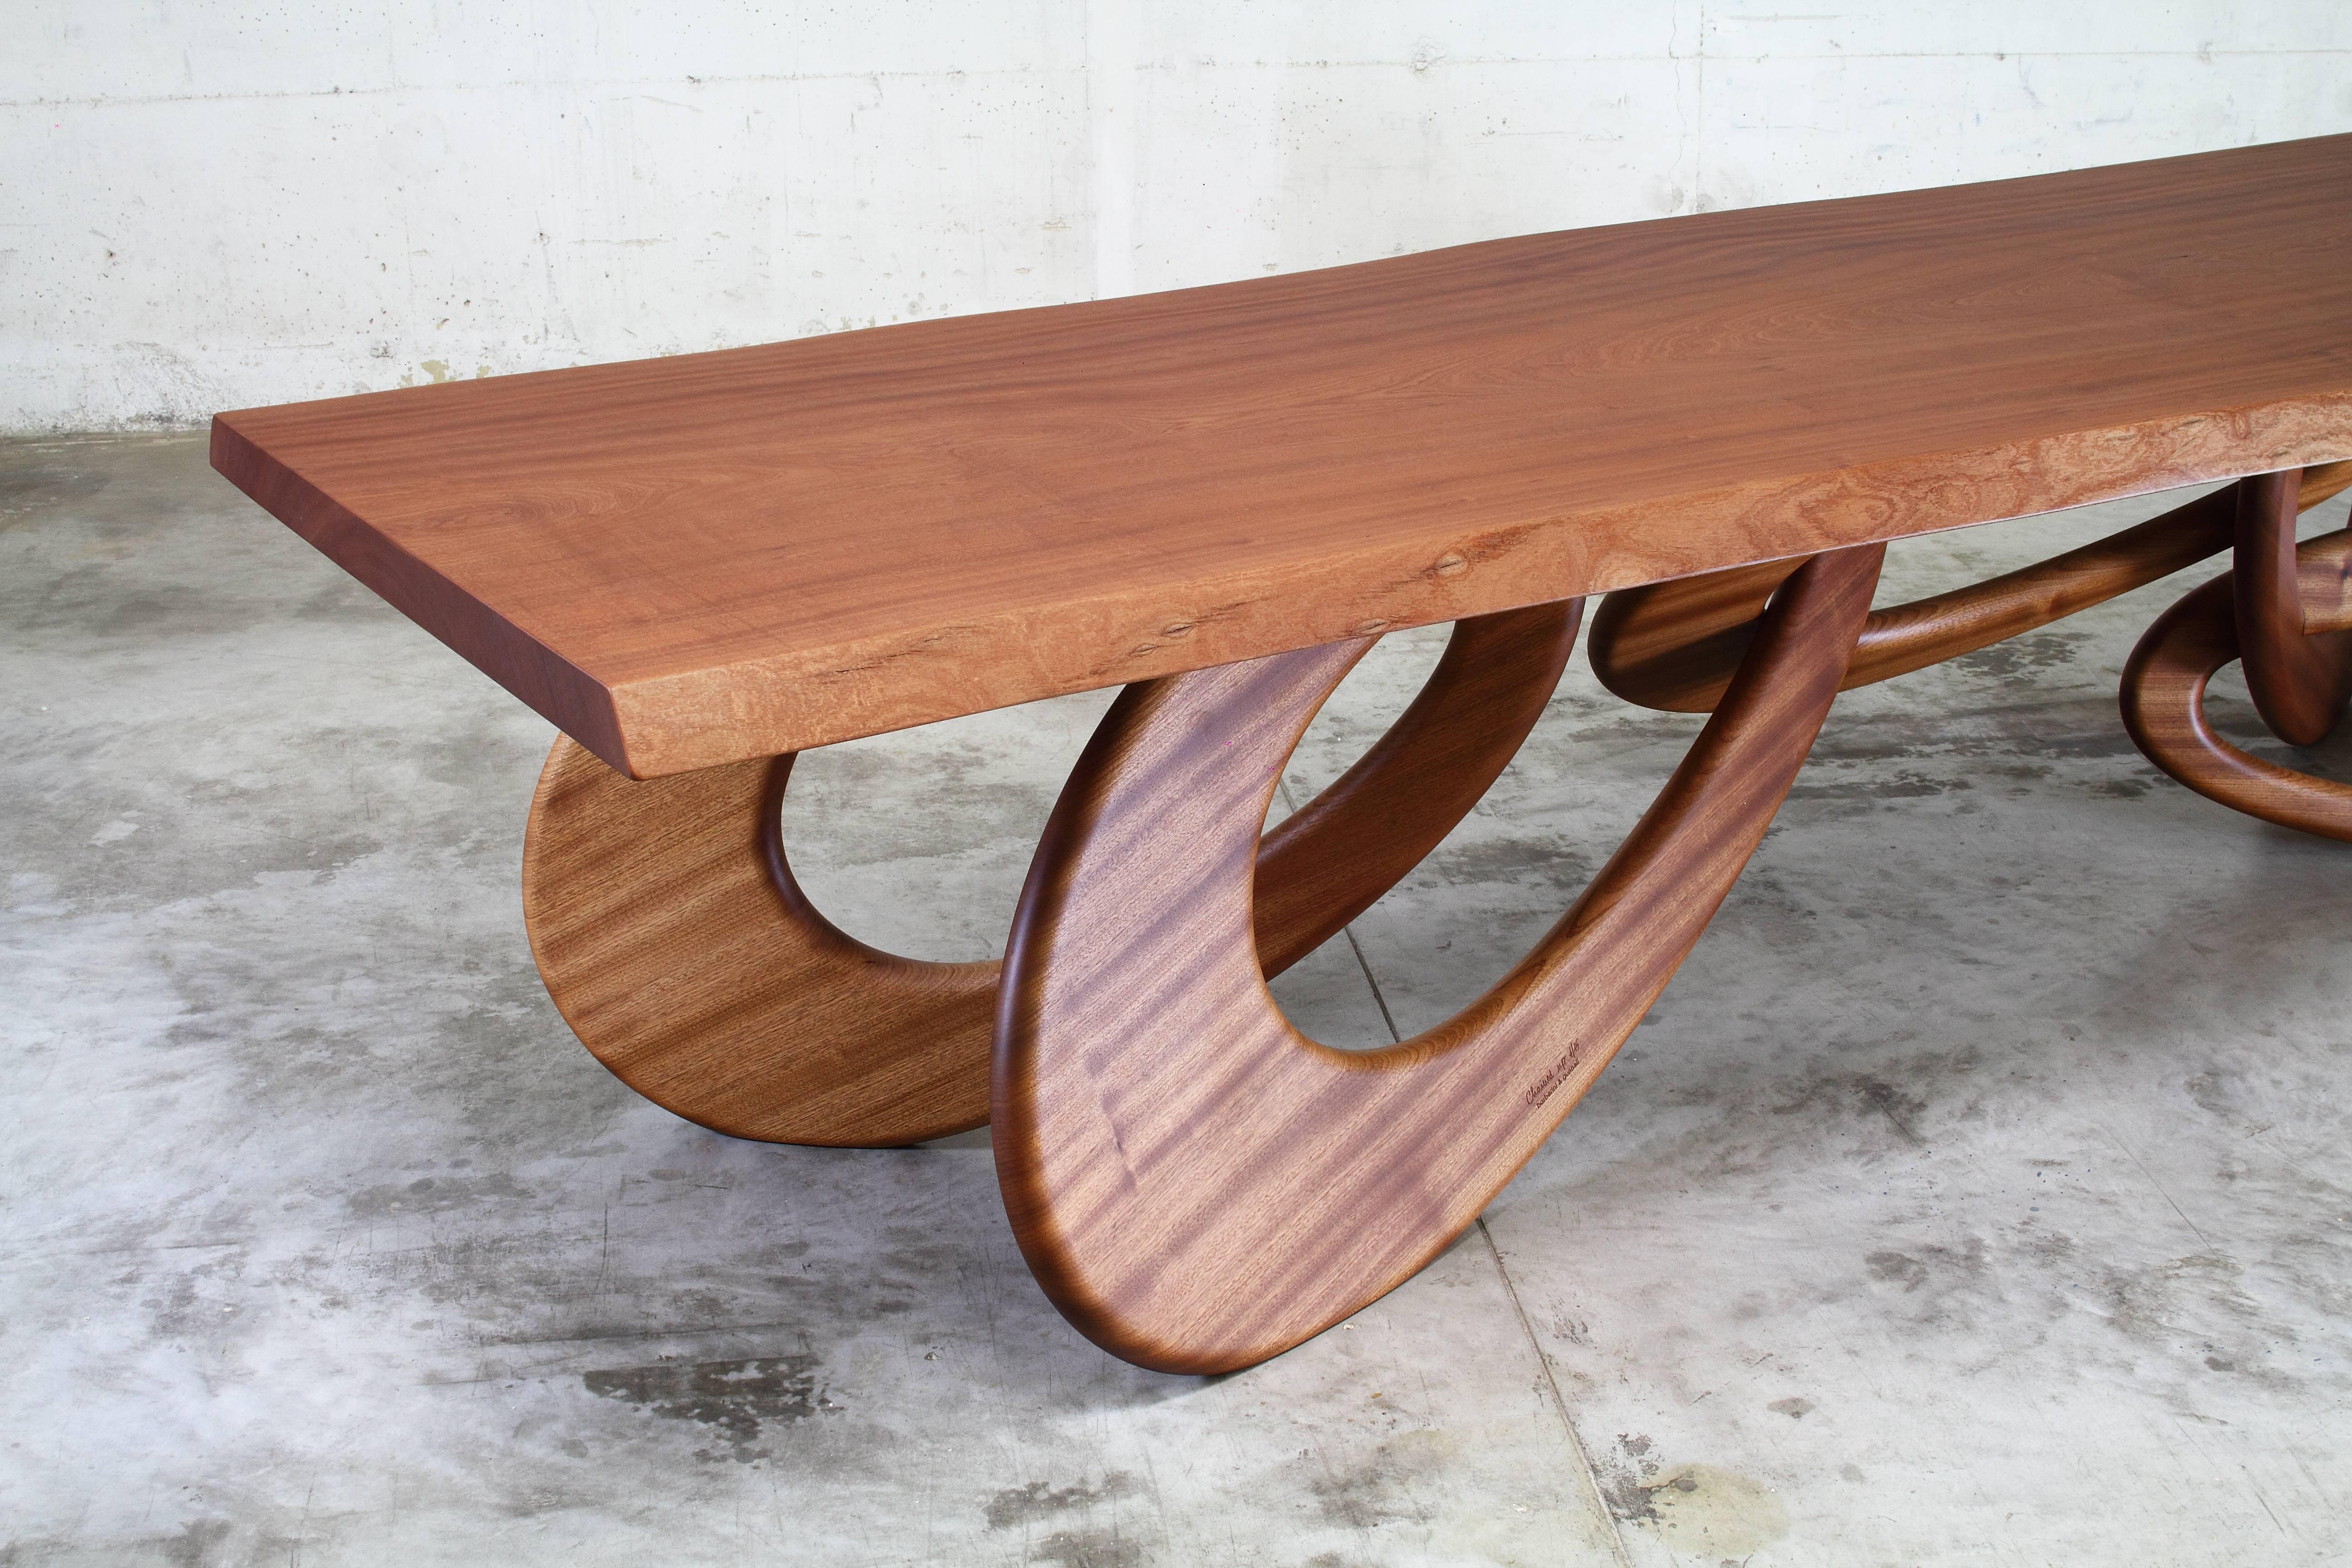 Italian Dining Table Solid Slab Wood Mahogany Collectible Design Handmade Italy For Sale